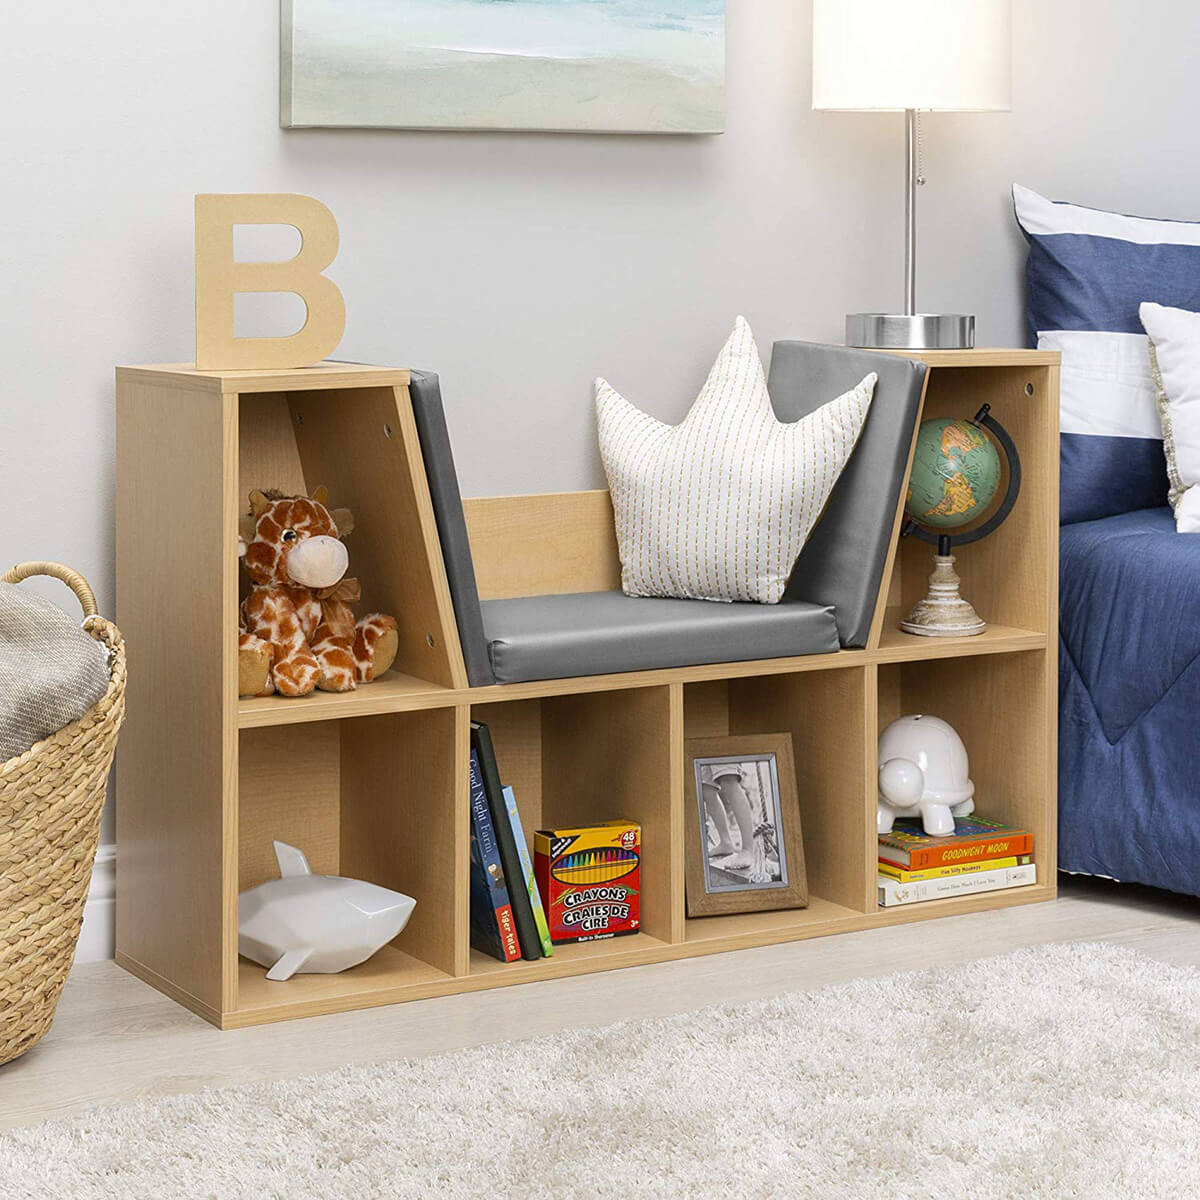 Cute and Practical Reading Nook with Cubbies